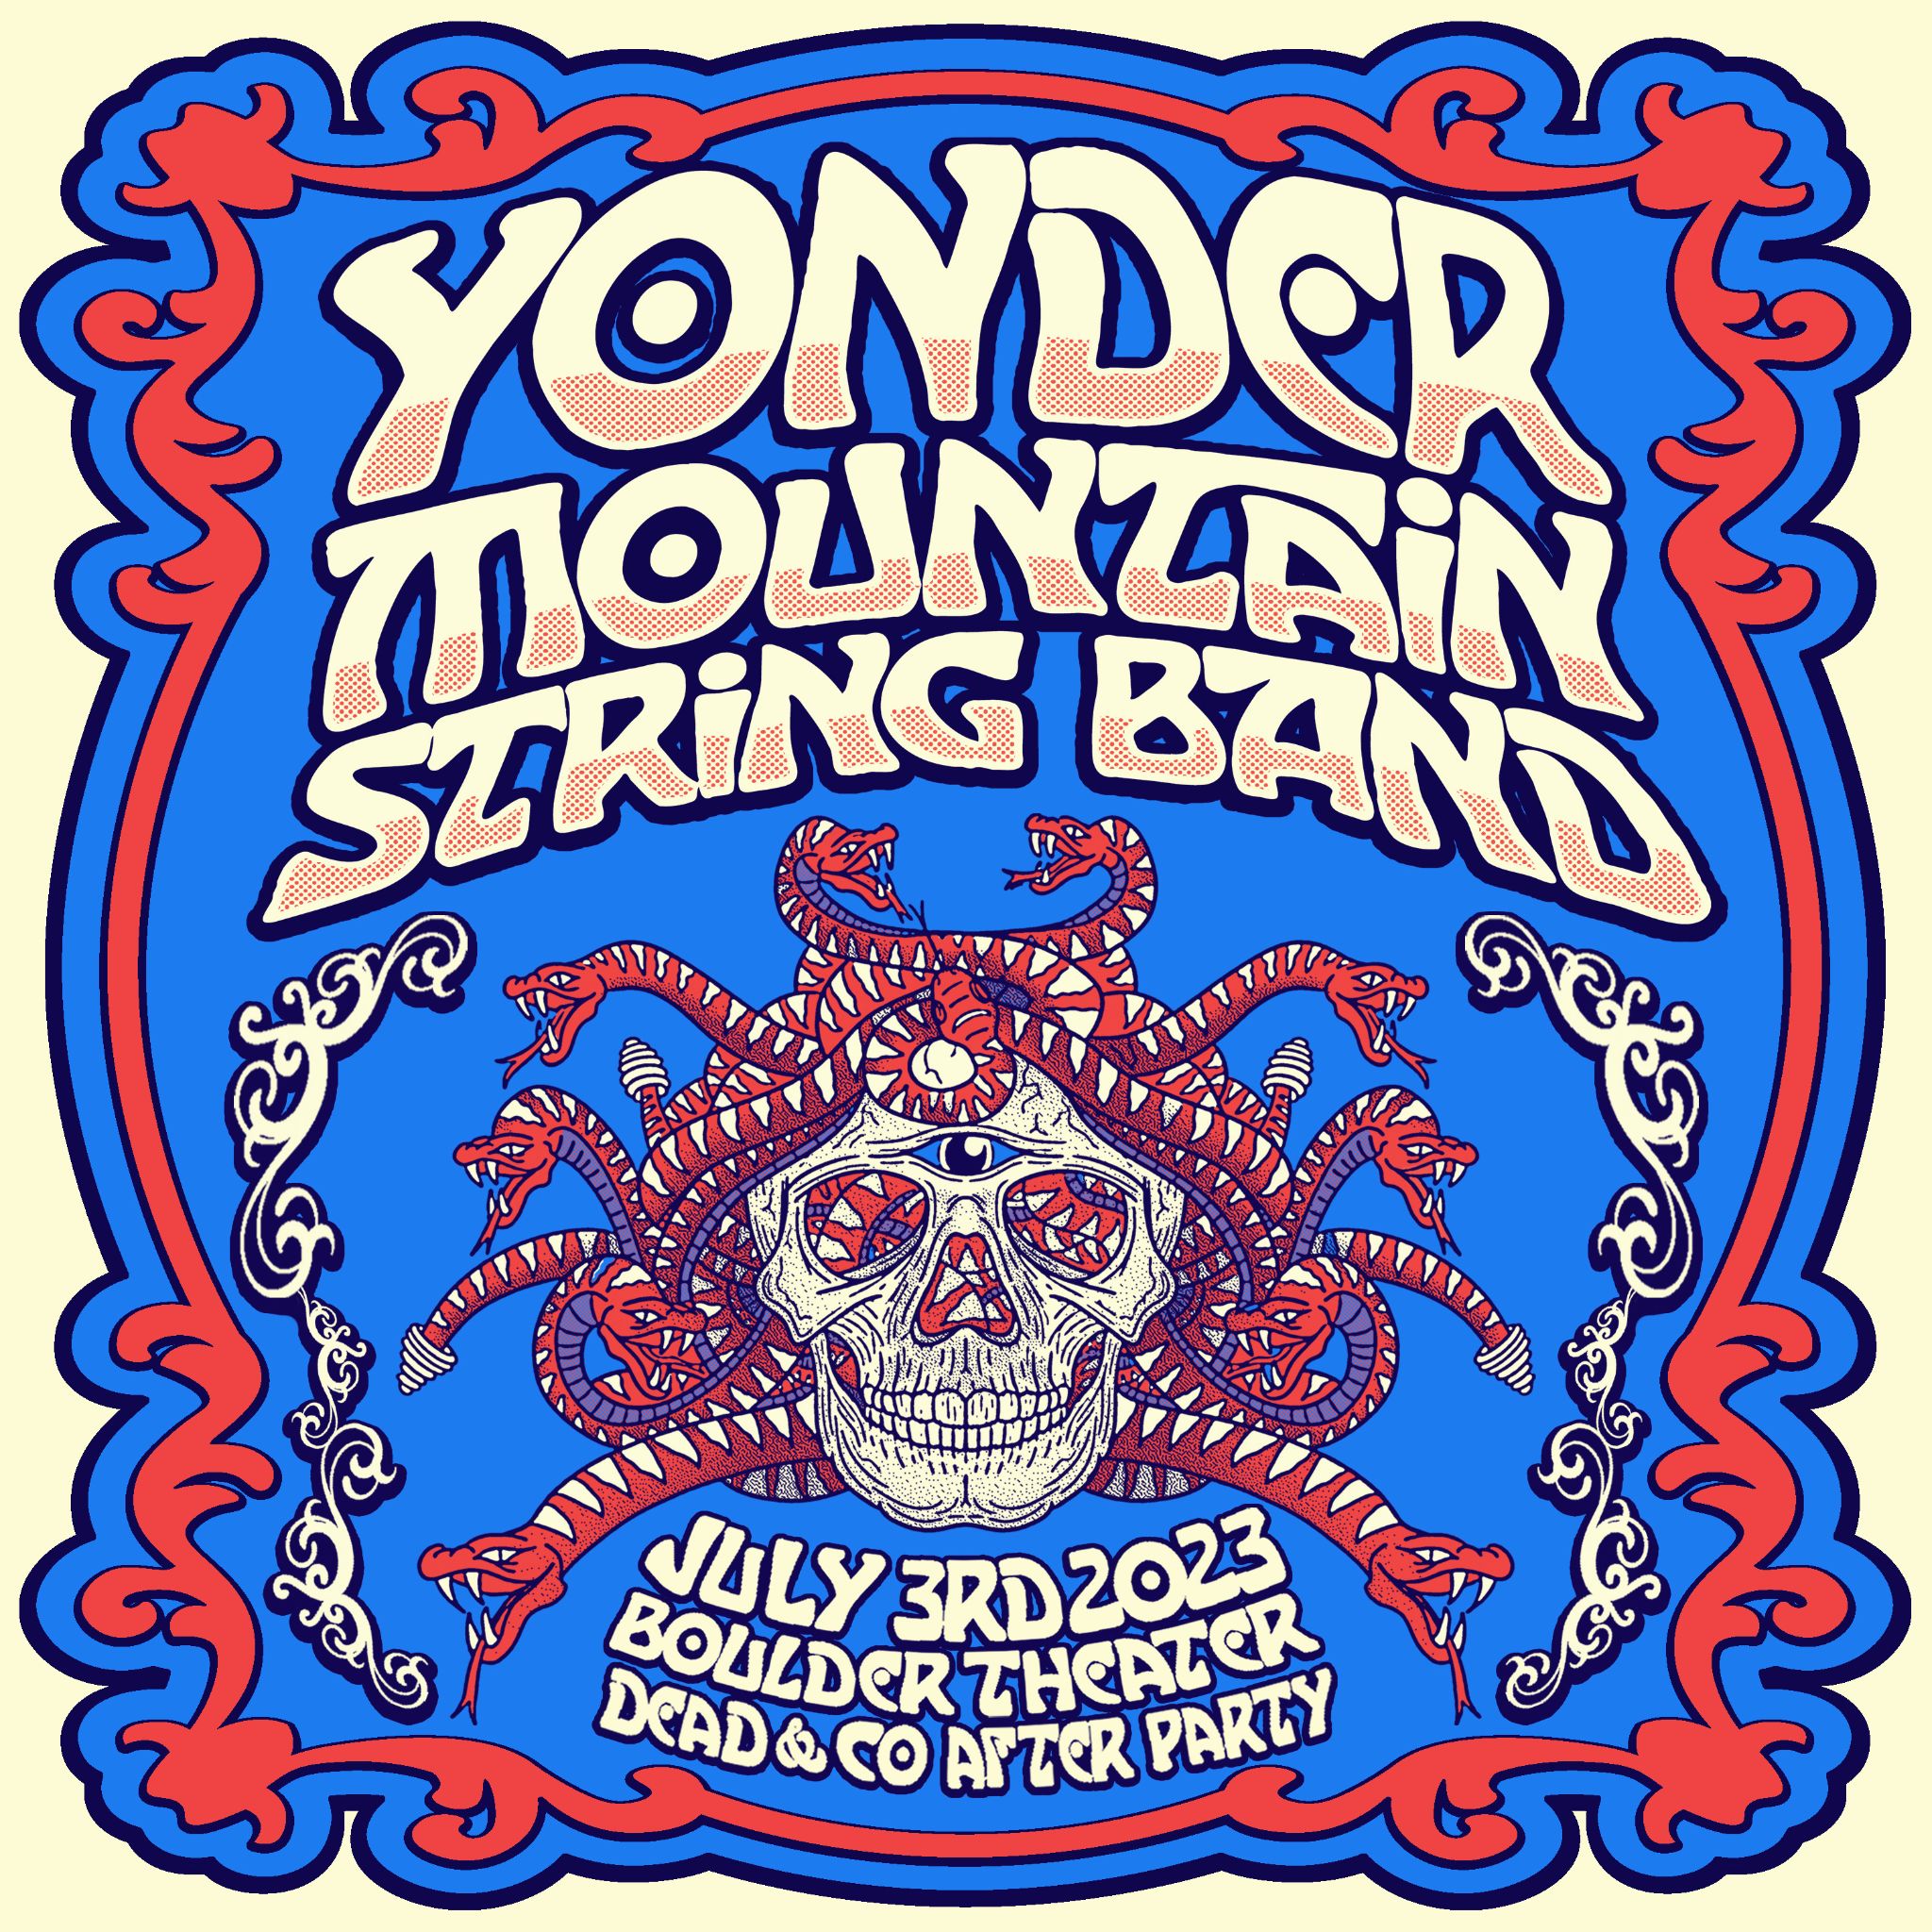 Yonder Mountain String Band to play Dead & CO After-party at Boulder Theater!